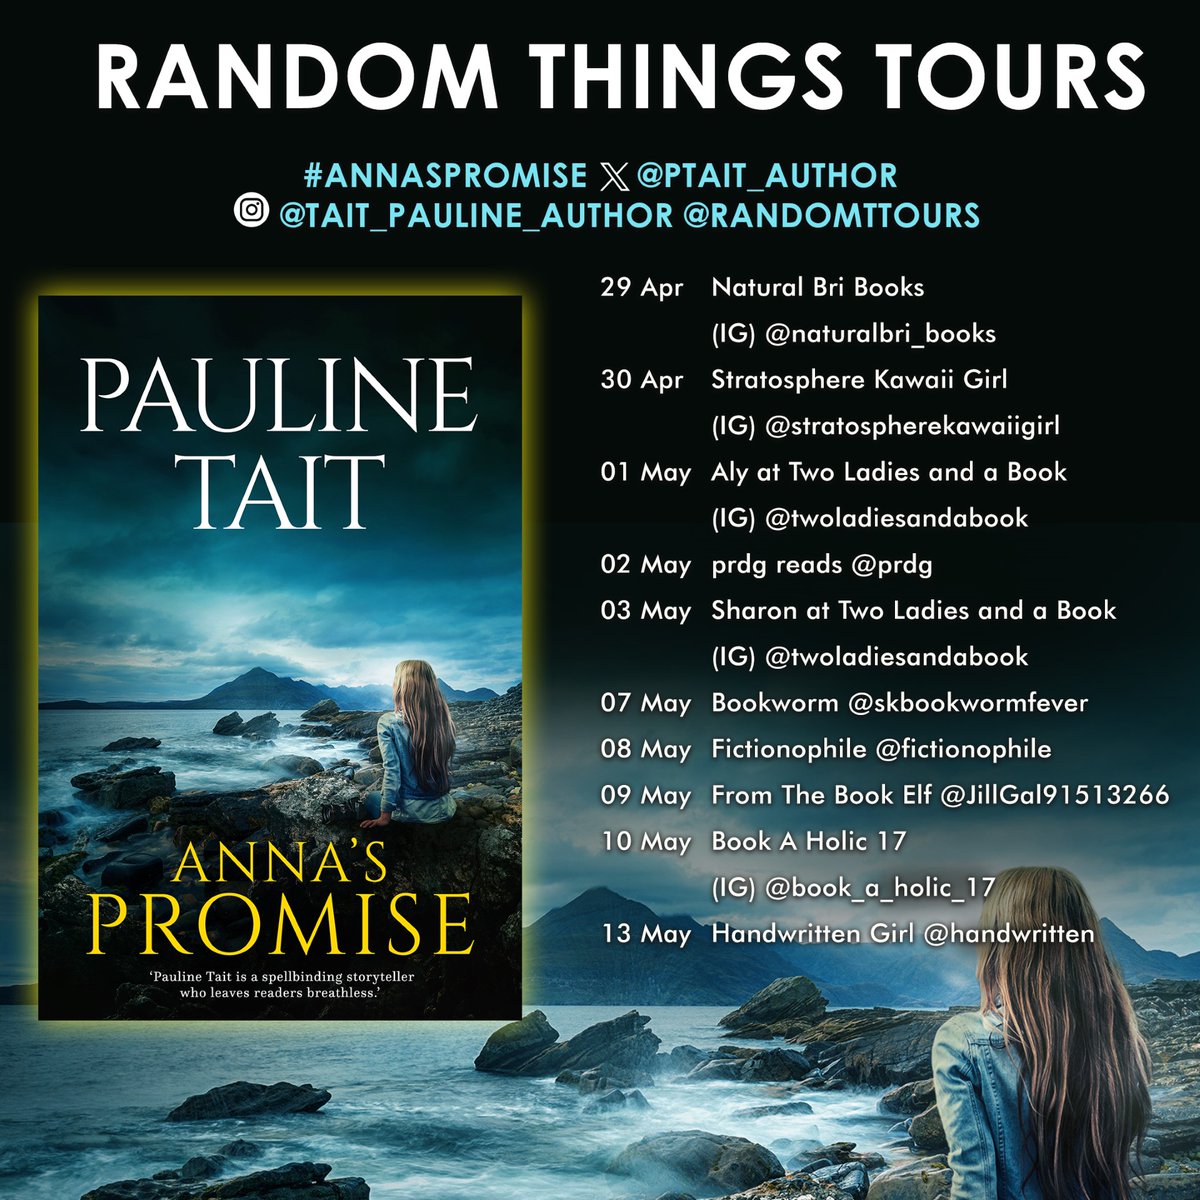 HUGEST THANKS #RandomThingsTours Bloggers for supporting #AnnasPromise @PTait_author Please share reviews on Amazon/Goodreads @skbookwormfever @fictionophile